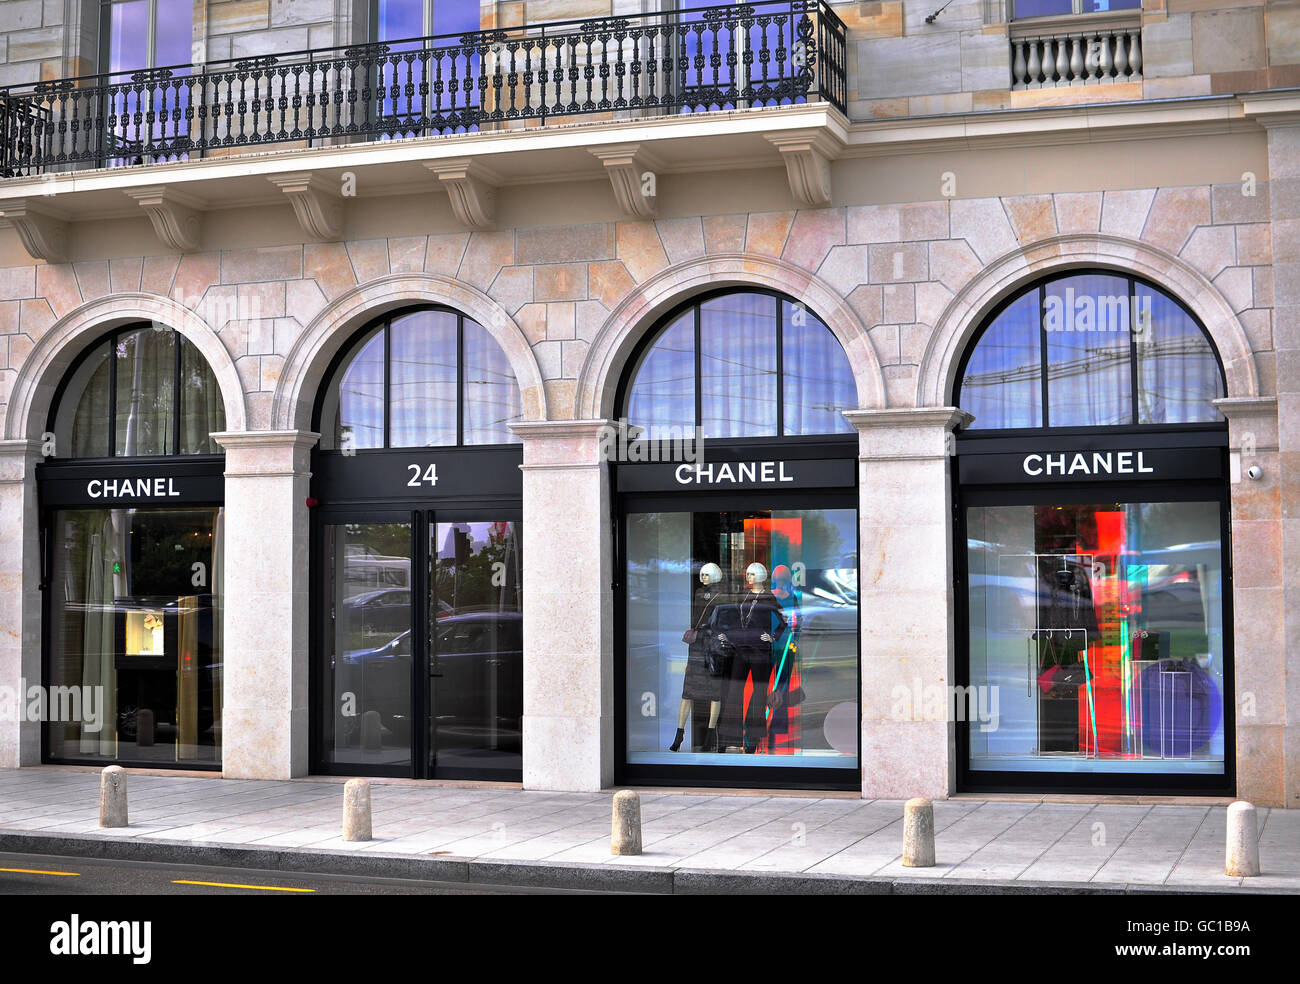 Chanel Store Locator by